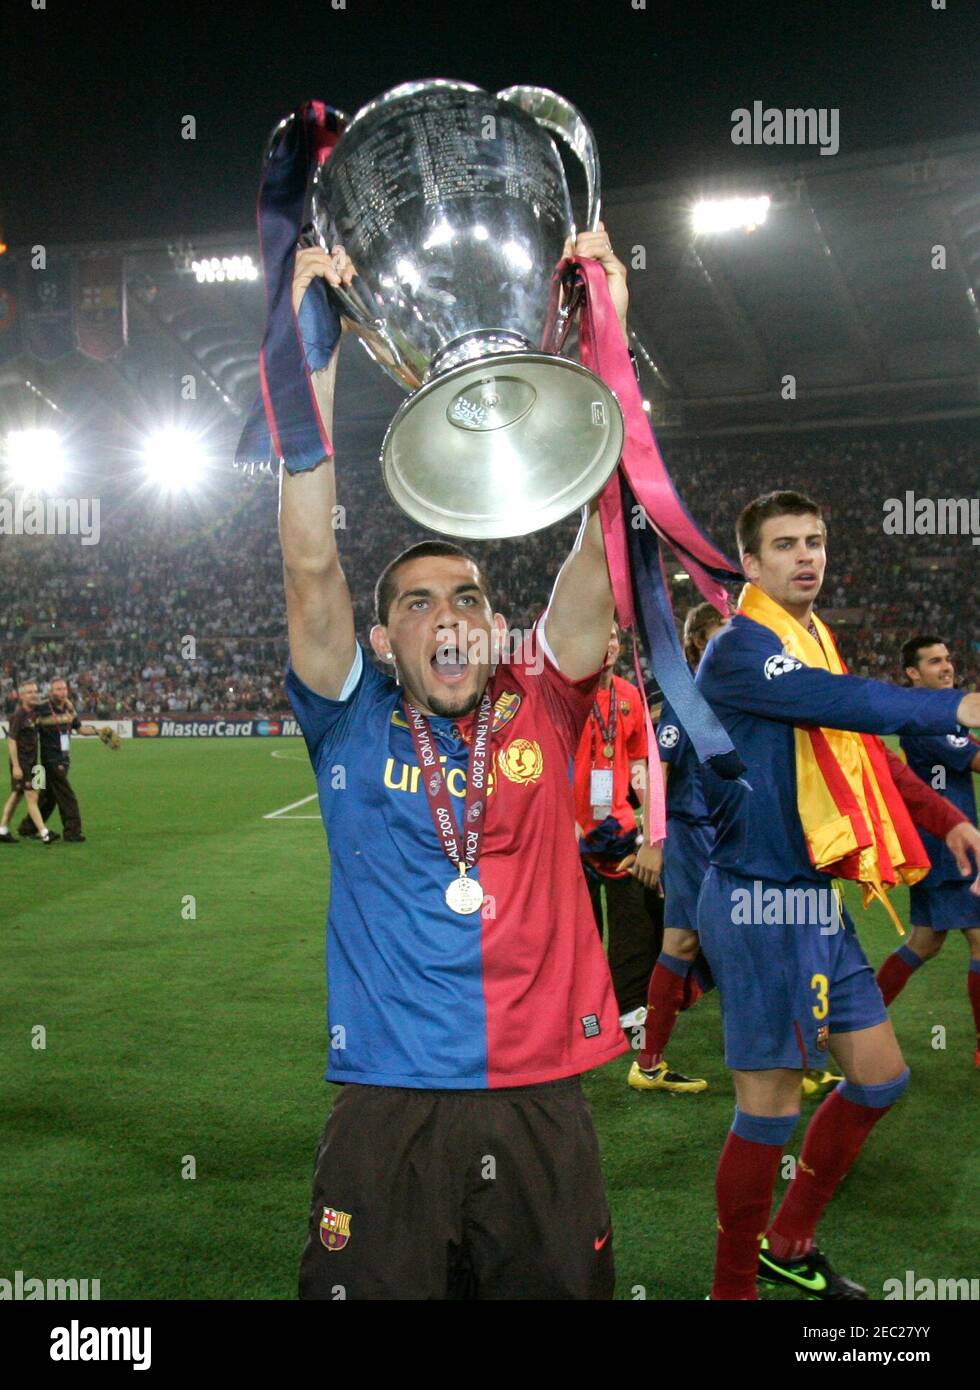 Football - Manchester United v FC Barcelona - 2009 Champions League Final -  Olympic Stadium, Rome, Italy - 08/09 - 27/5/09 FC Barcelona's Daniel Alves  celebrates victory with the trophy Mandatory Credit: Action Images / Lee  Smith Stock Photo - Alamy